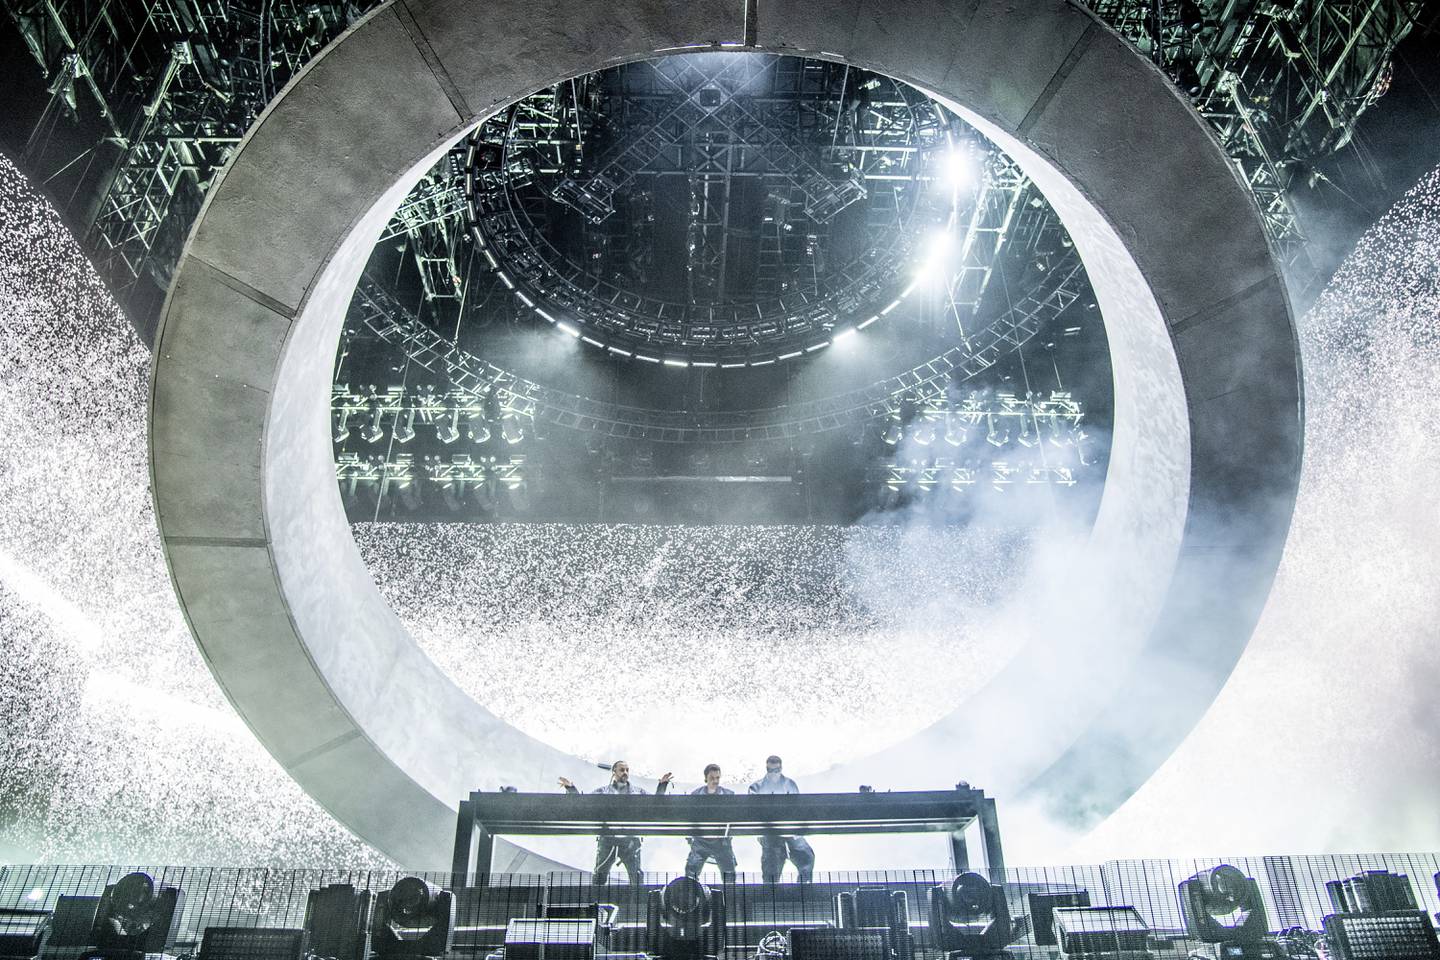 Swedish House Mafia unveiled their new stage set design, featuring a circular structure resembling a flying saucer, at the 2022 Coachella Valley Music And Arts Festival. AP